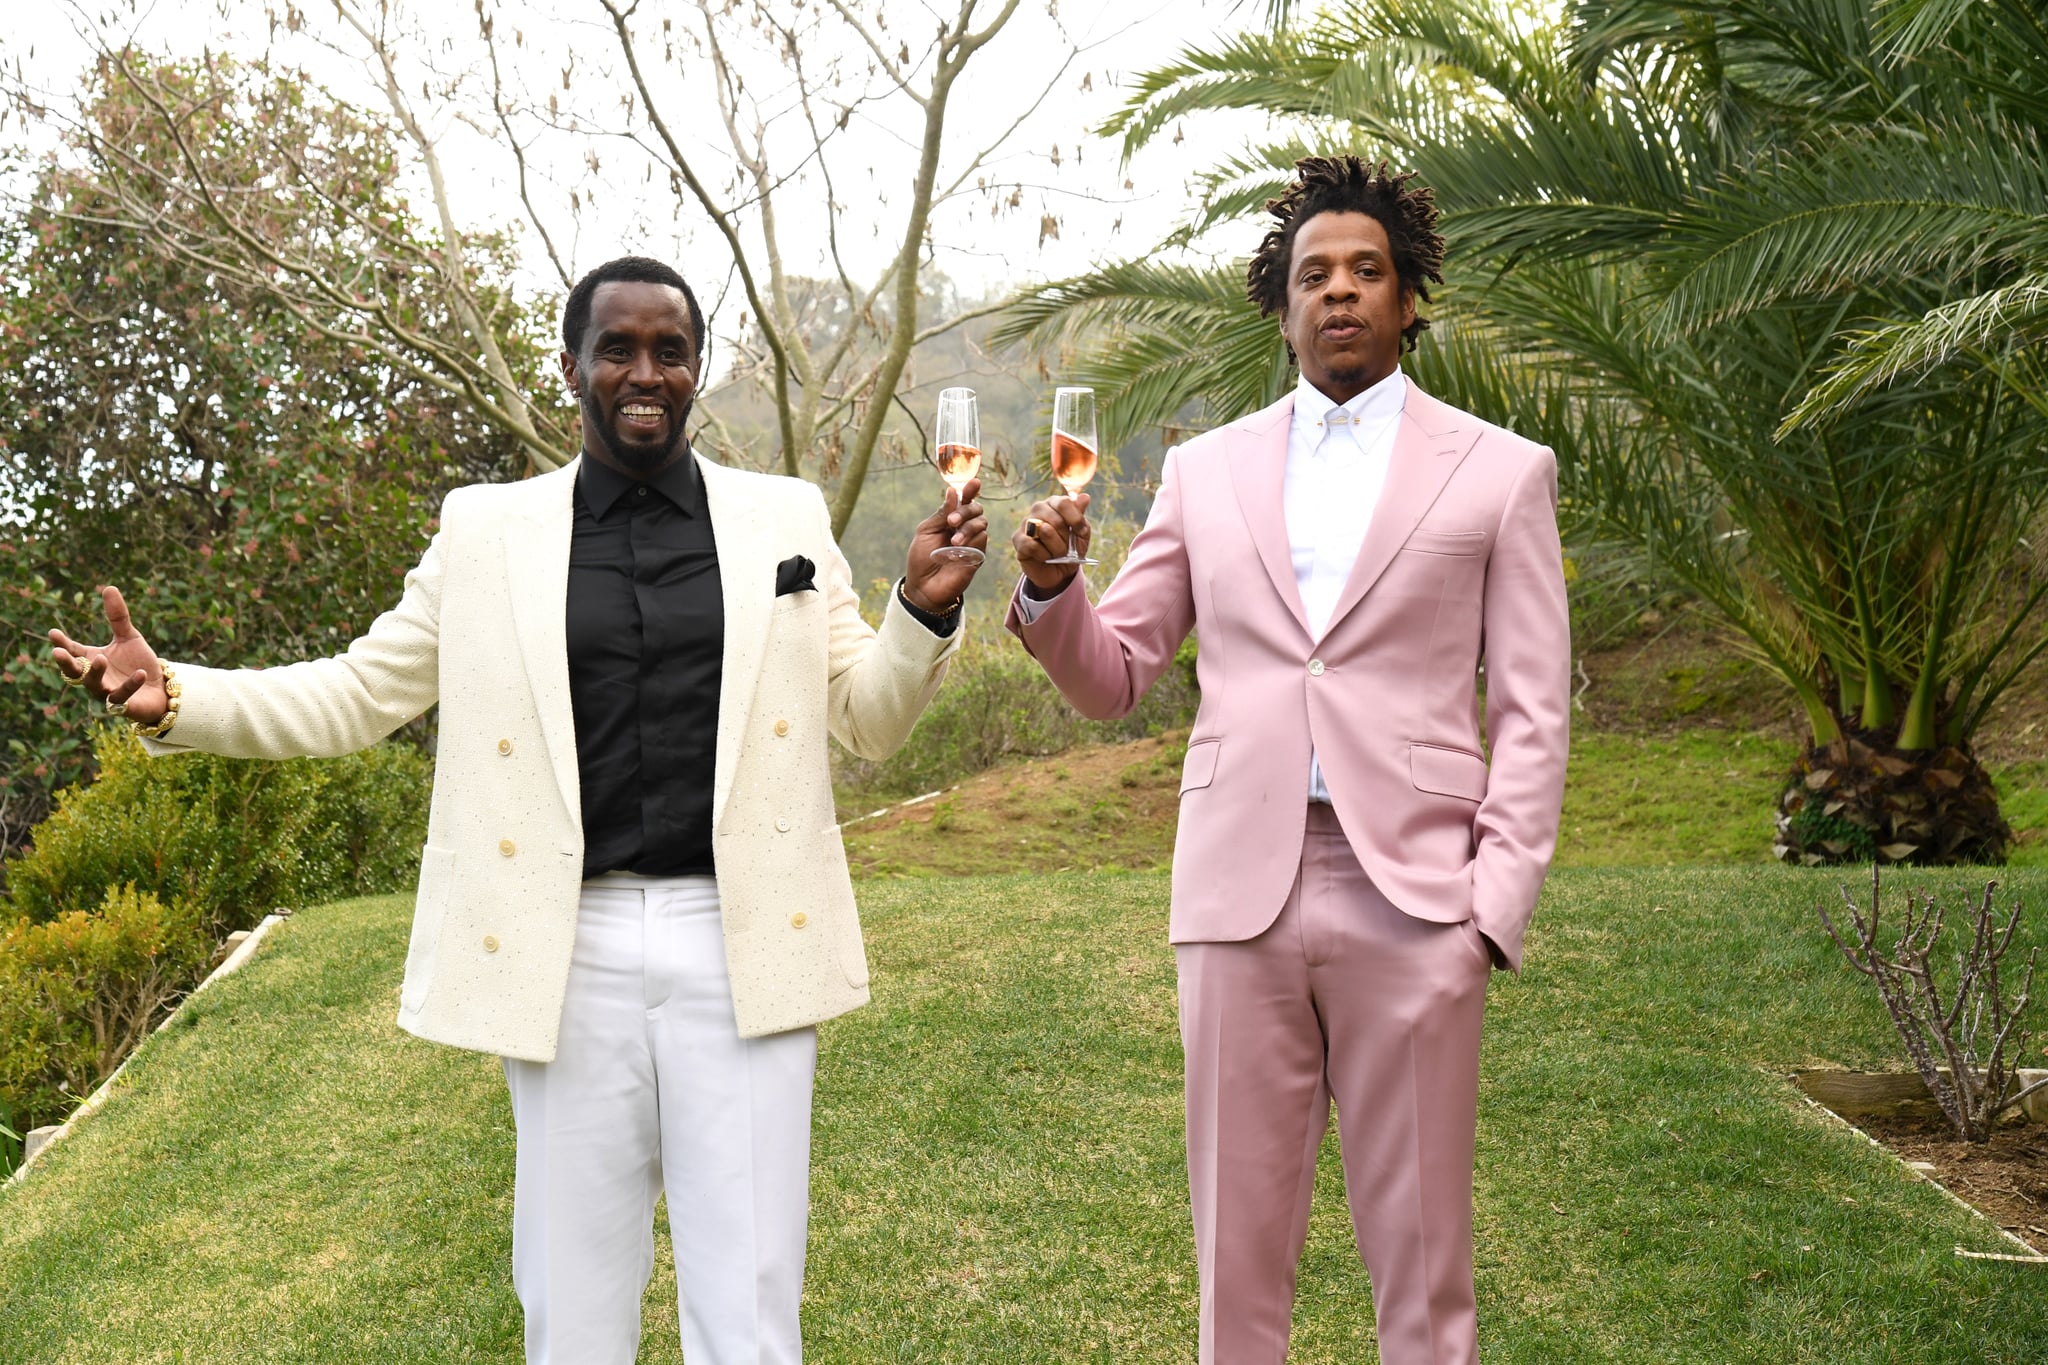 Diddy and JAY-Z at the 2020 Roc Nation Brunch in LA | Seeing Stars! Beyoncé and JAY-Z's Roc Nation Brunch Brings Out Some of Music's Finest | POPSUGAR Celebrity UK Photo 35